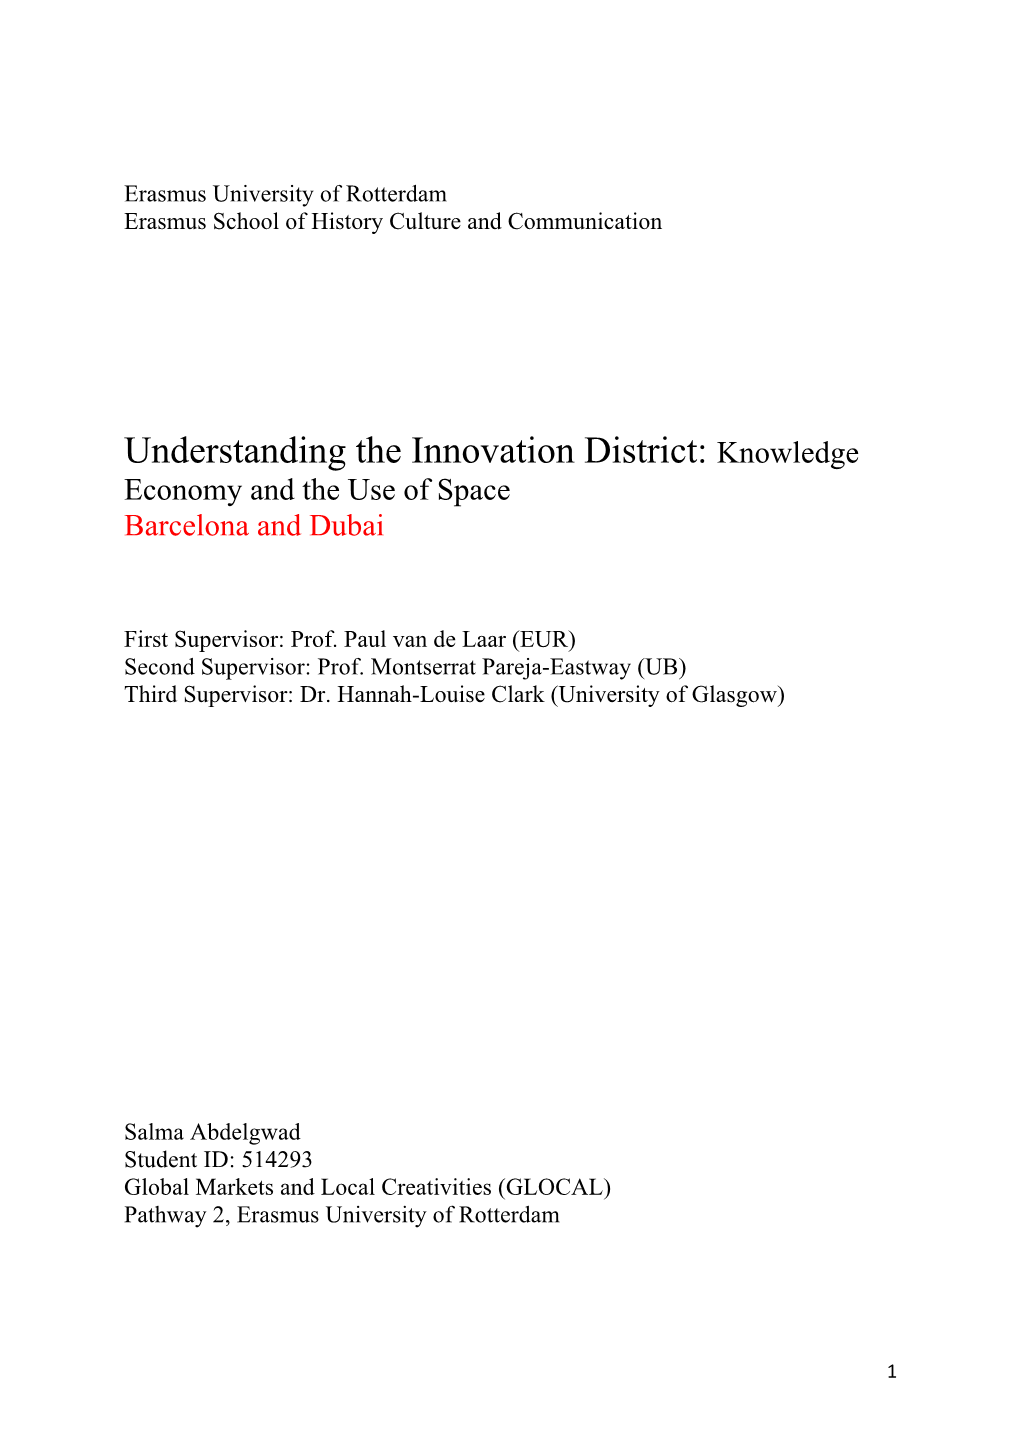 Understanding the Innovation District: Knowledge Economy and the Use of Space Barcelona and Dubai